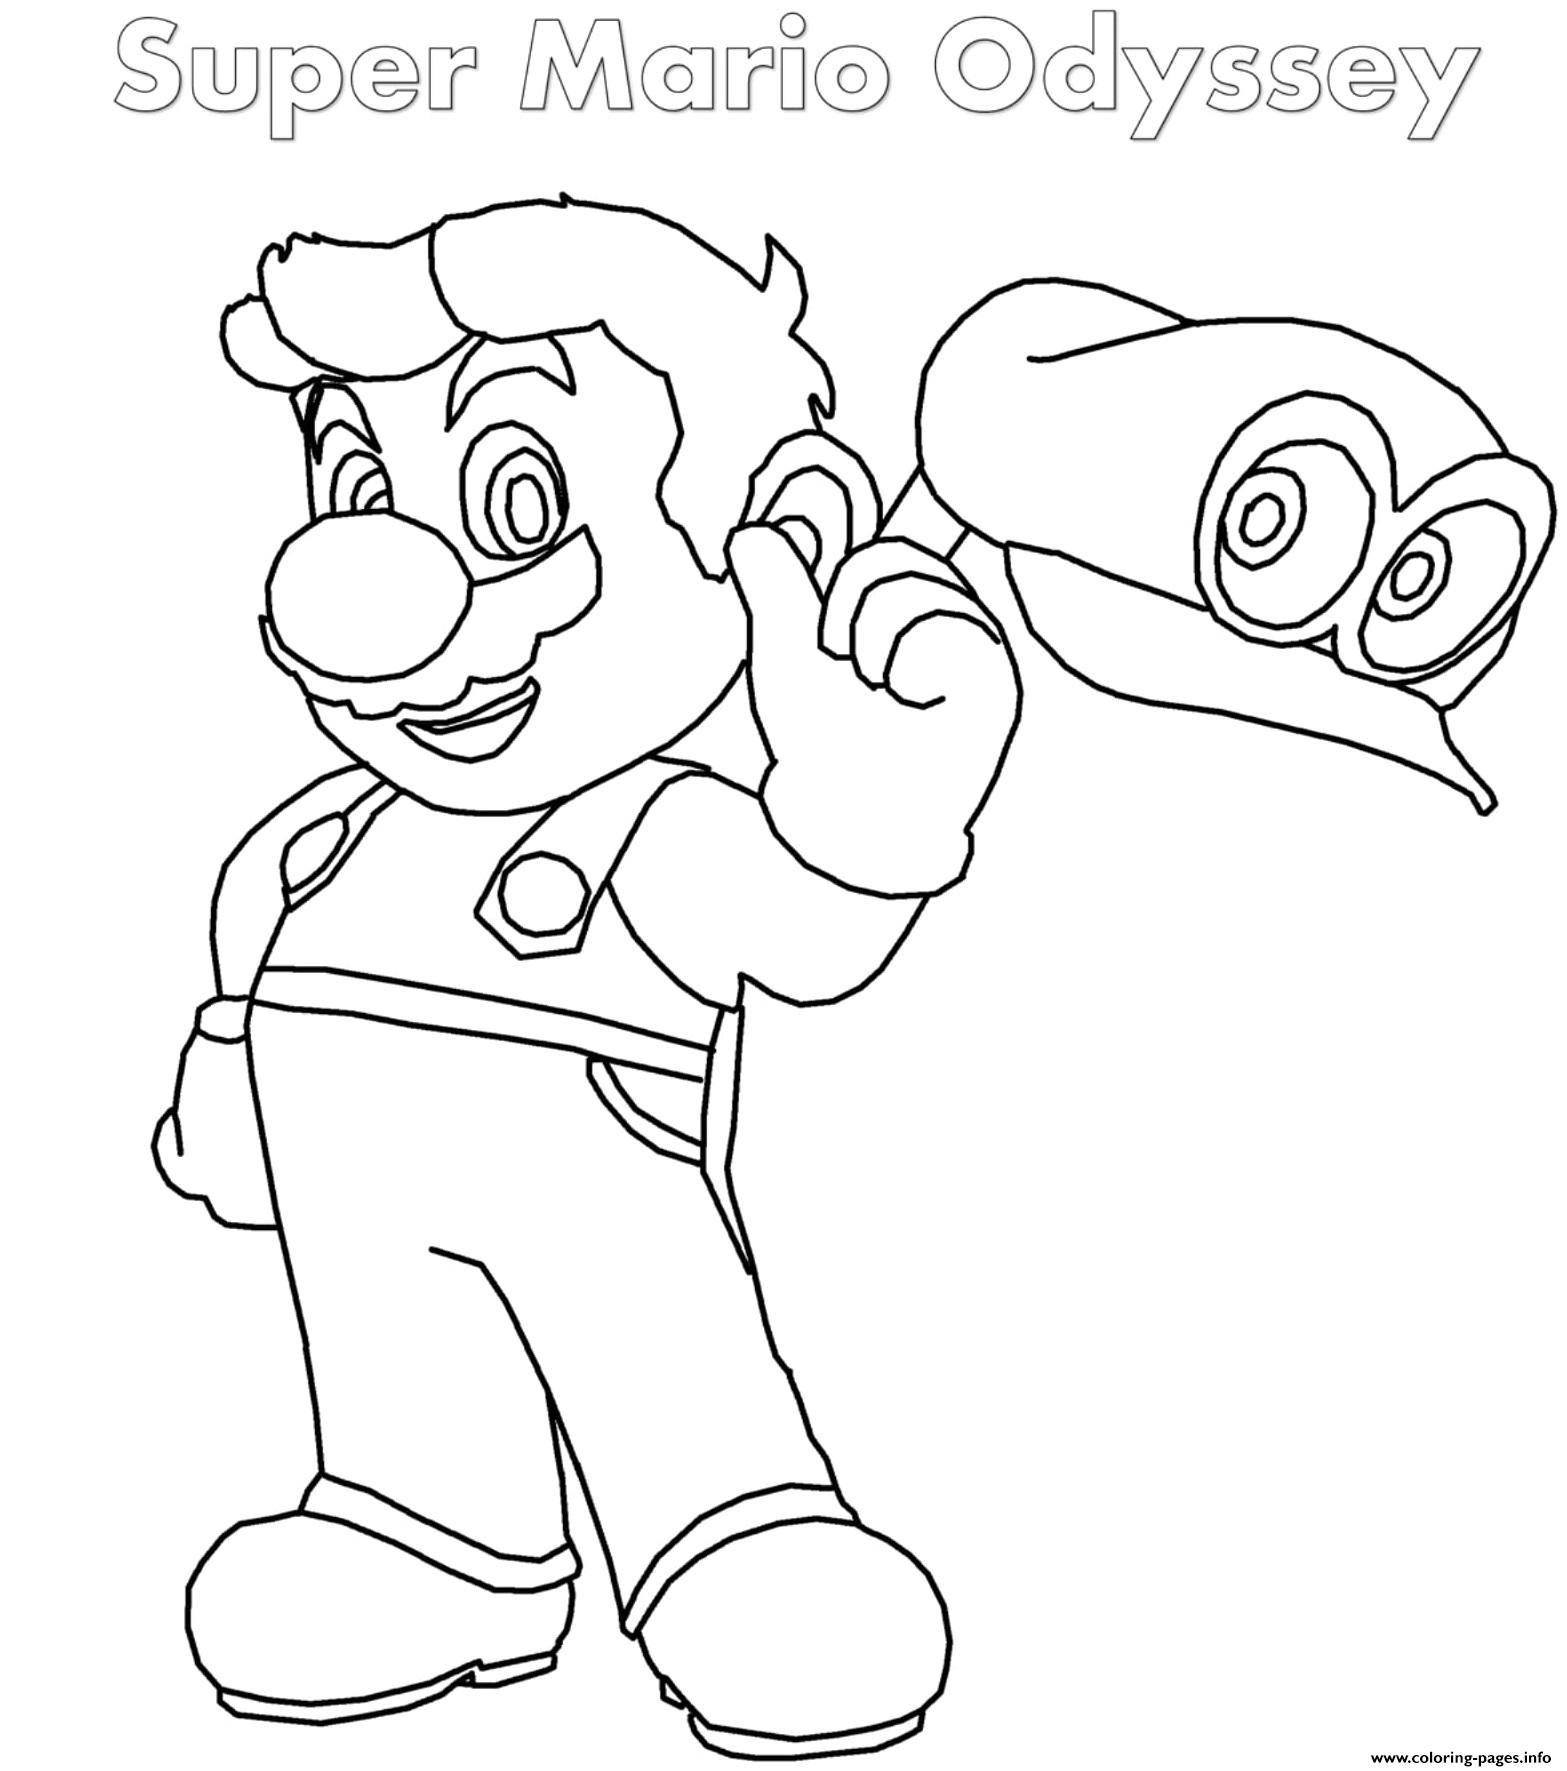 super-mario-odyssey-coloring-pages-coloring-home